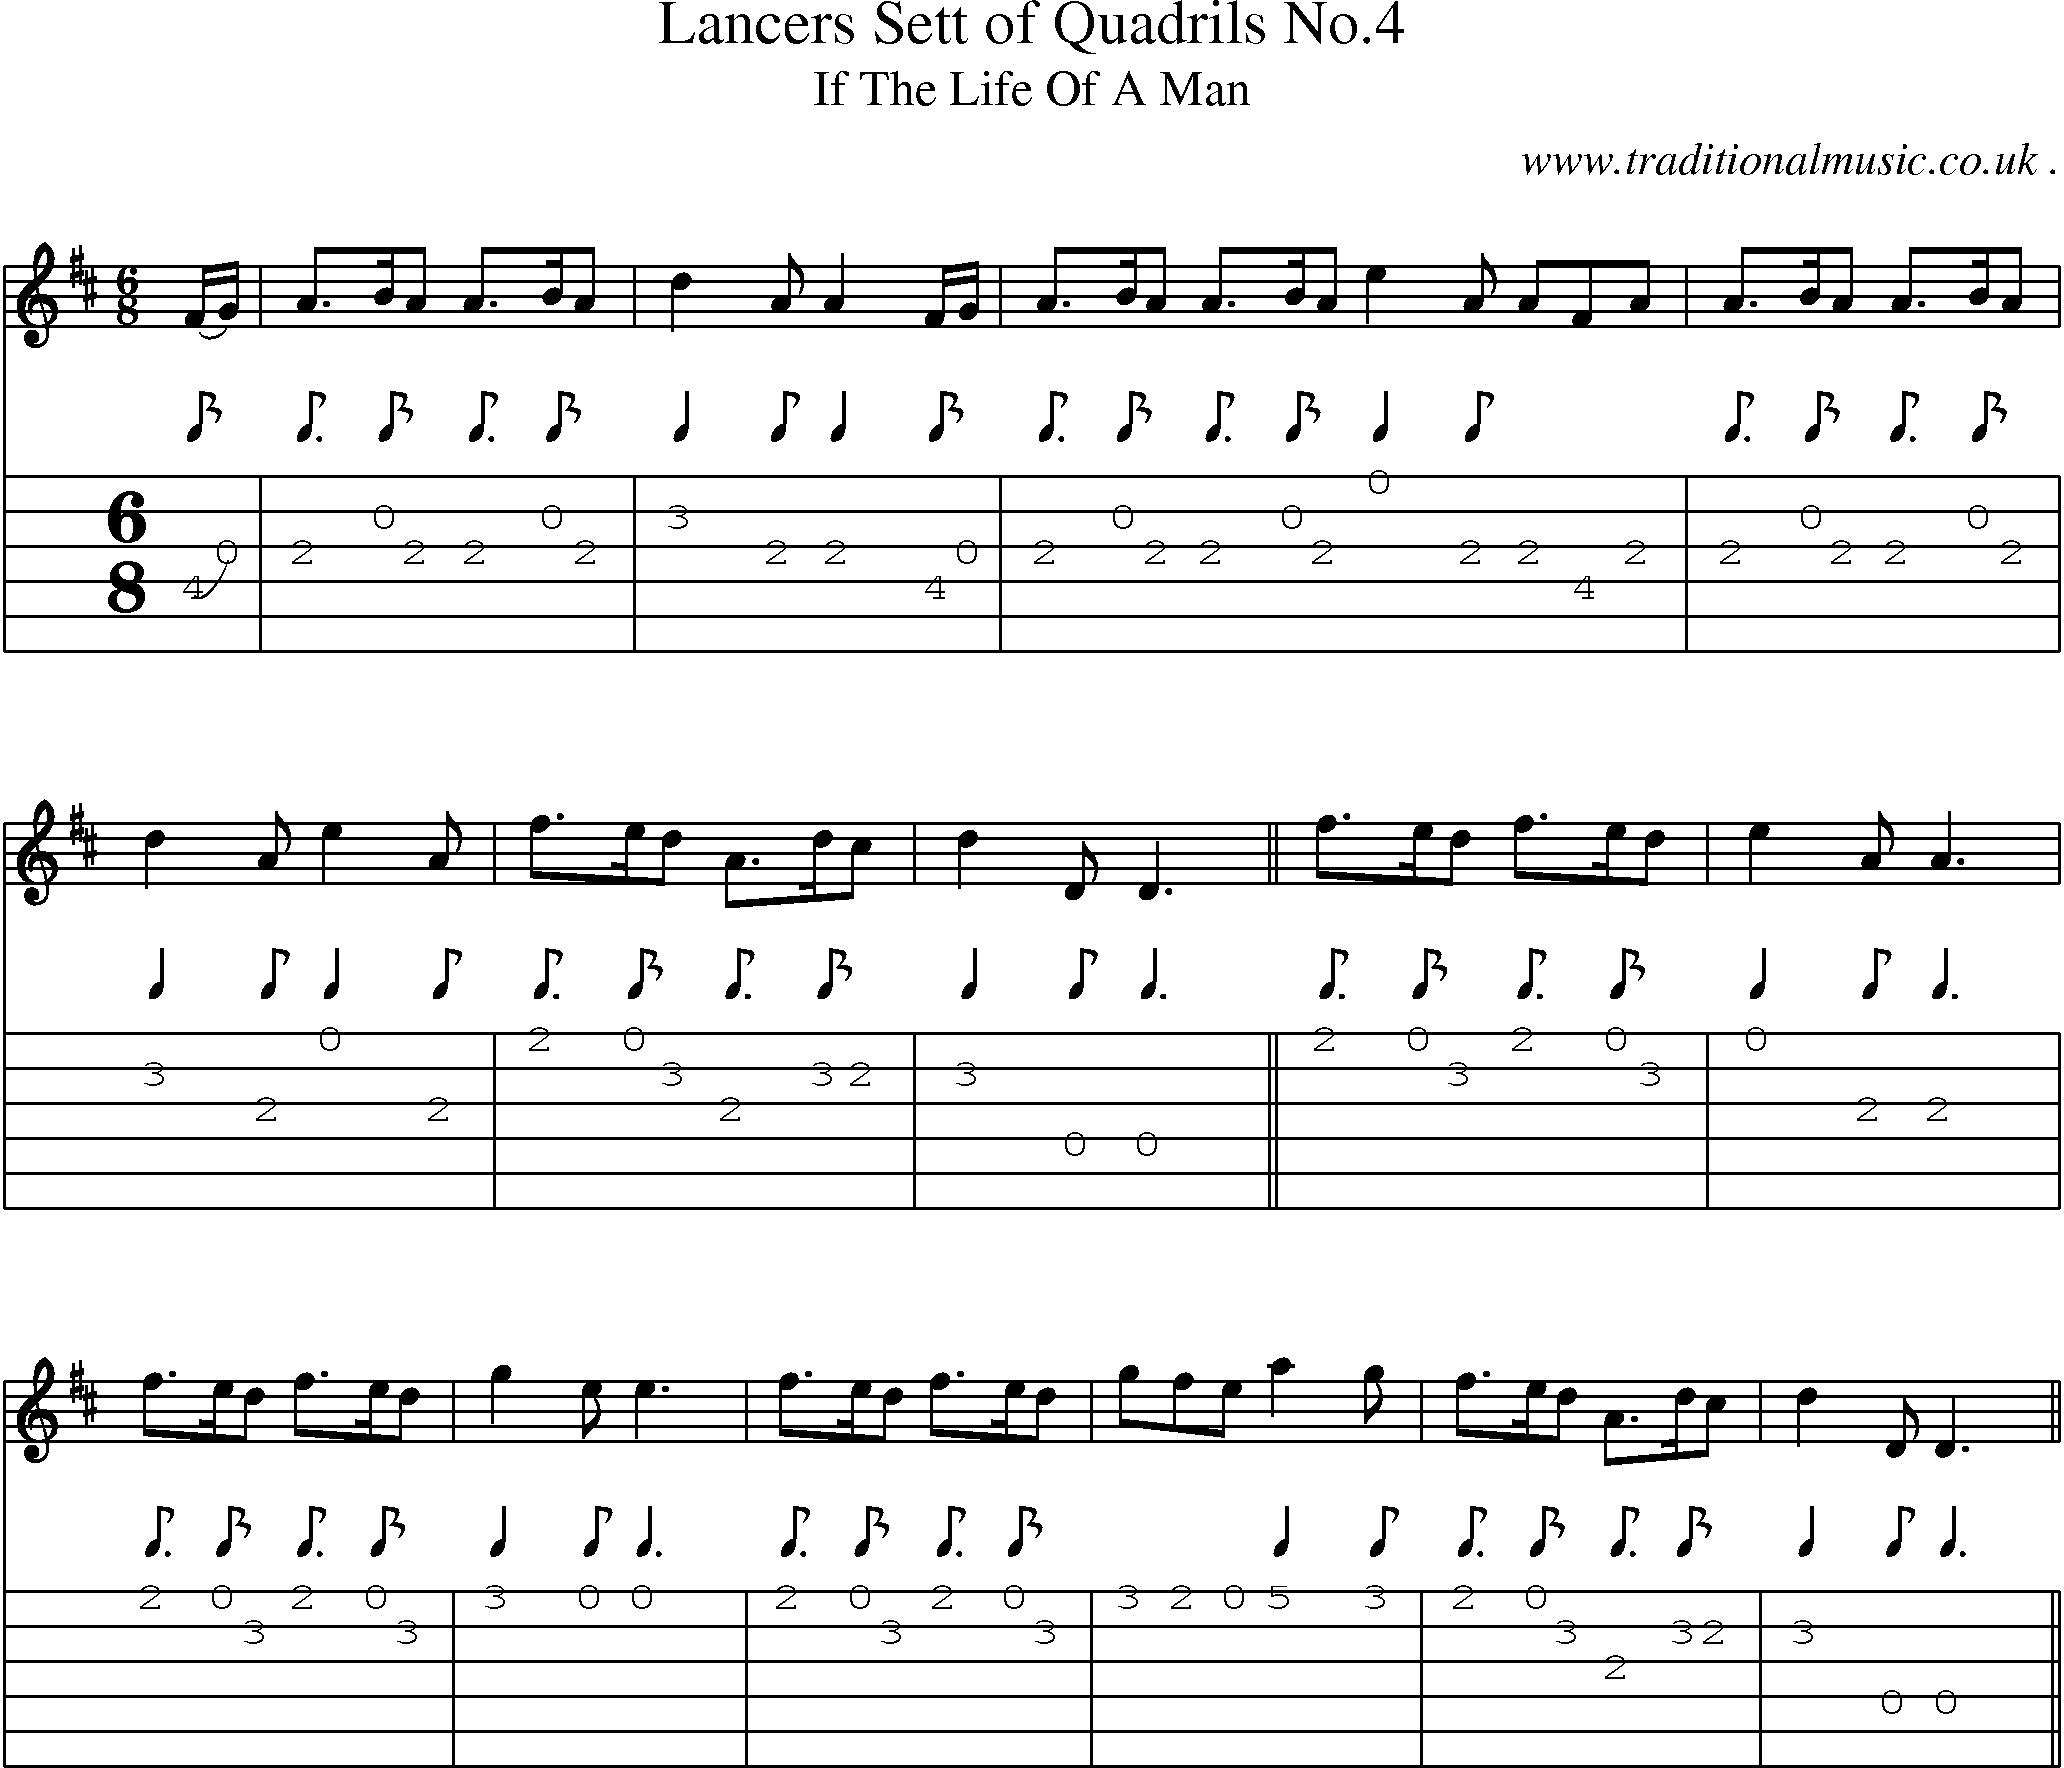 Sheet-Music and Guitar Tabs for Lancers Sett Of Quadrils No4